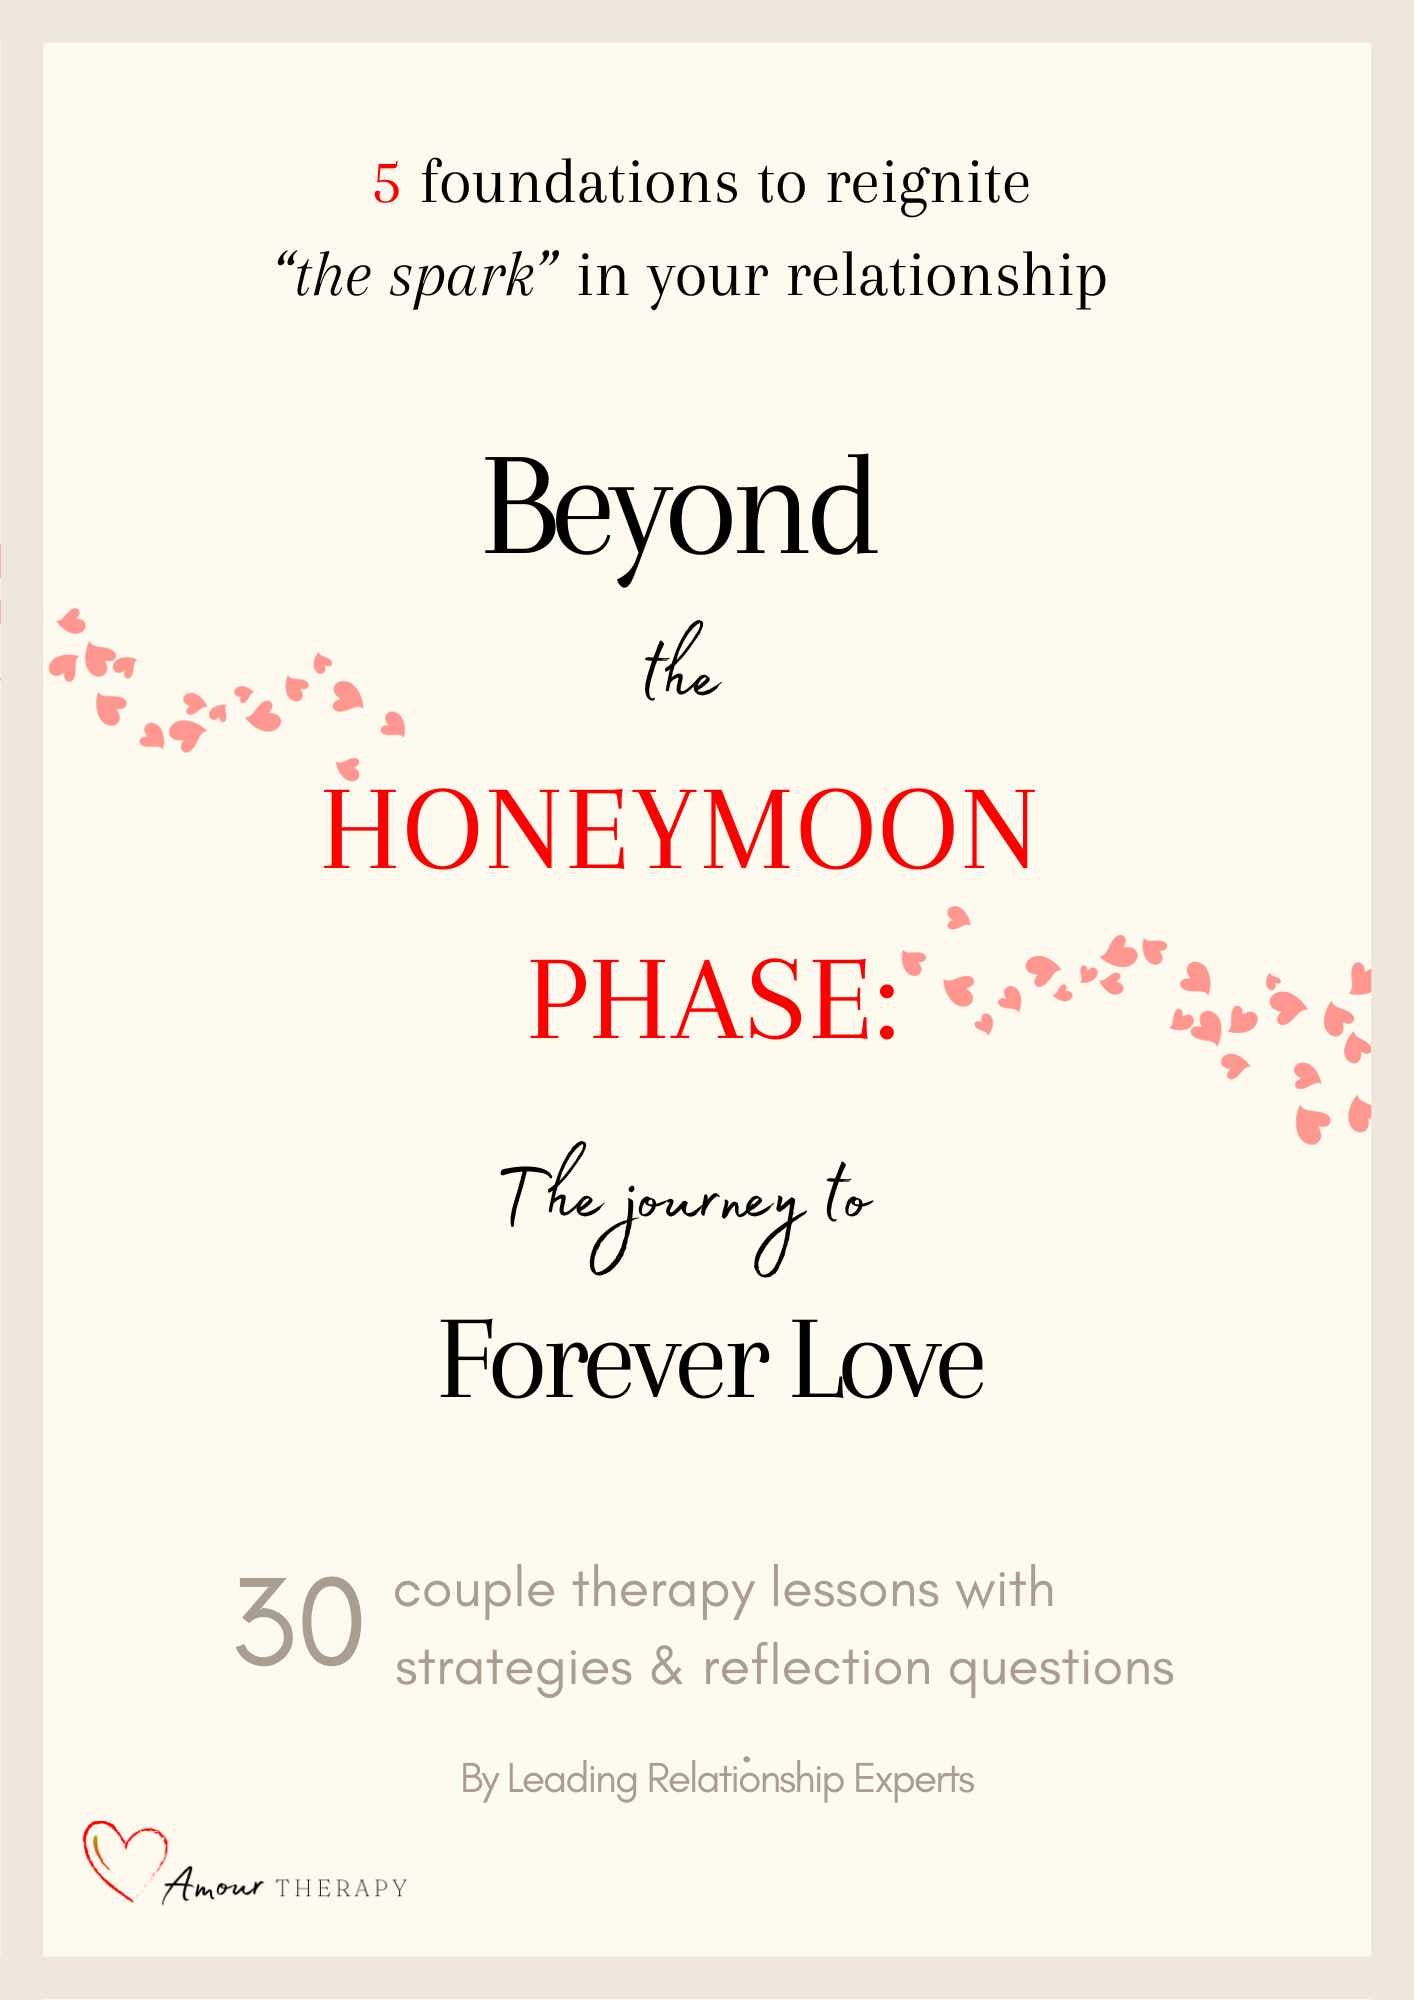 Beyond "The Honeymoon Phase" -  The Journey To Forever Love